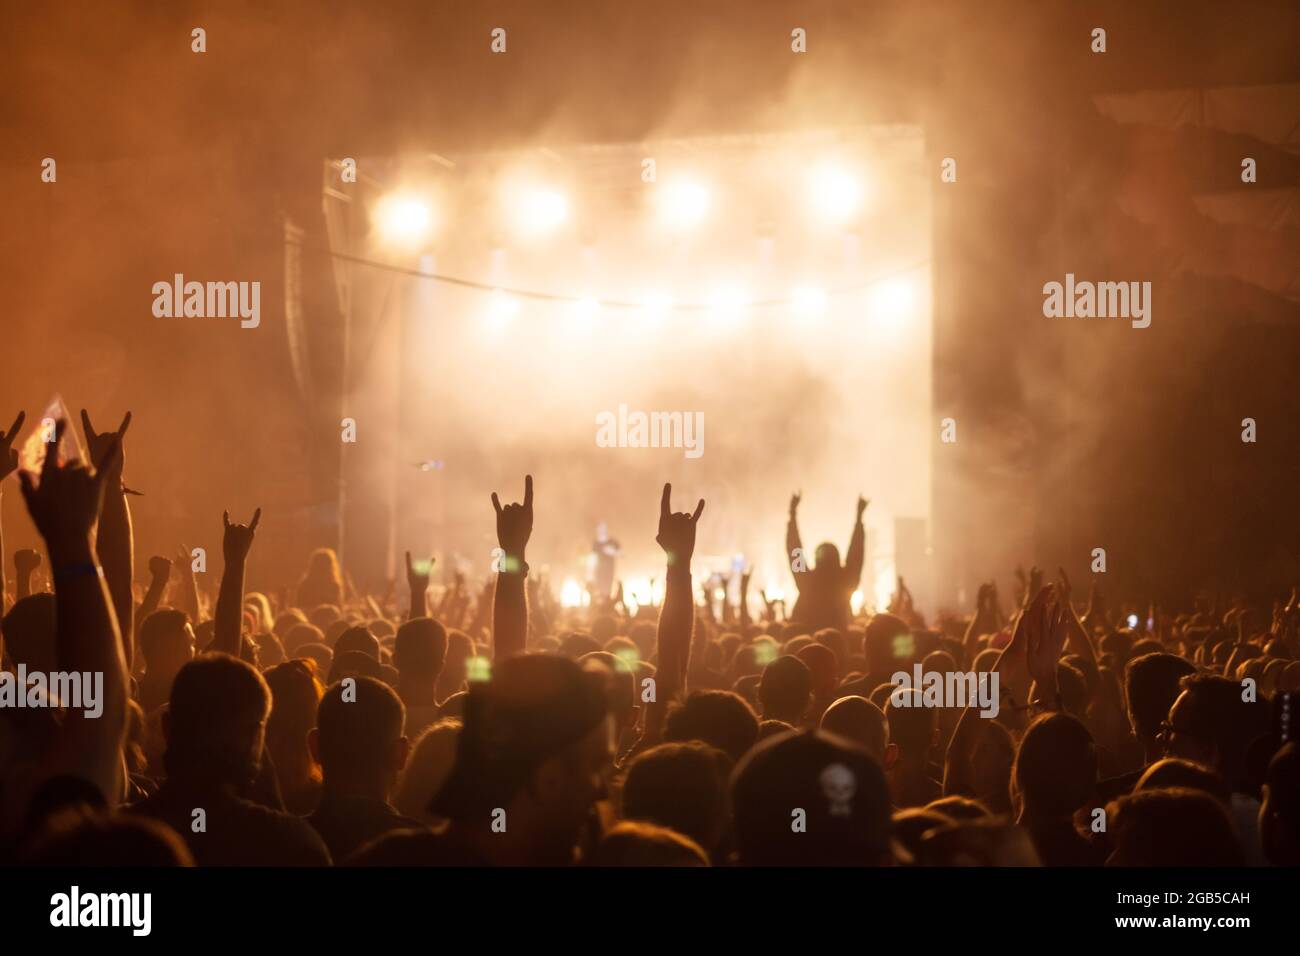 Silhouettes of concert crowd in front of bright stage lights. Rock and metal music concept Stock Photo